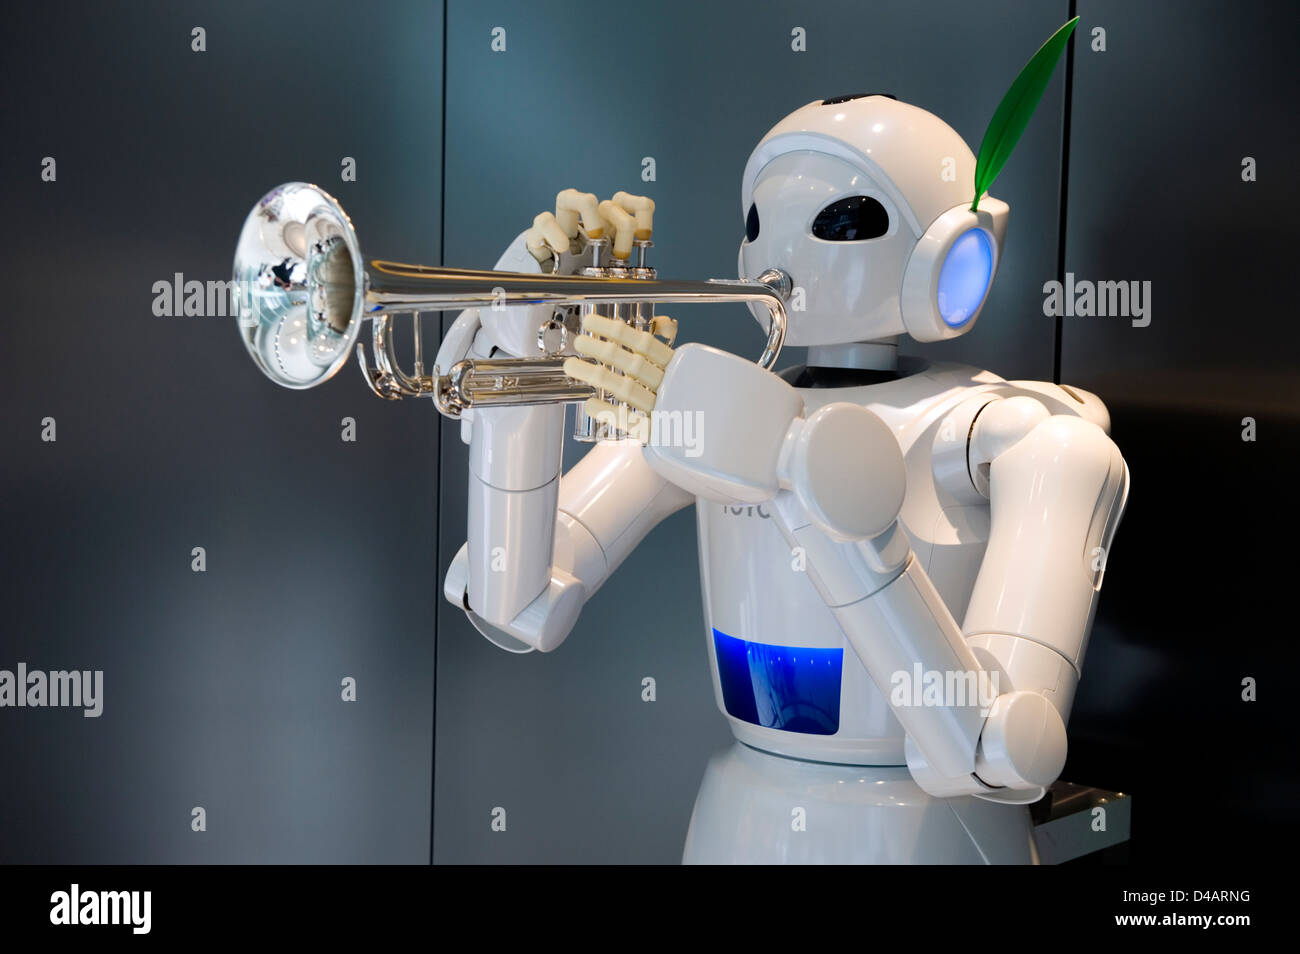 A white, humanoid, trumpet-playing 'Toyota Partner Robot' on display at the Toyota Kaikan Visitor's Center in Toyota City, Japan Stock Photo